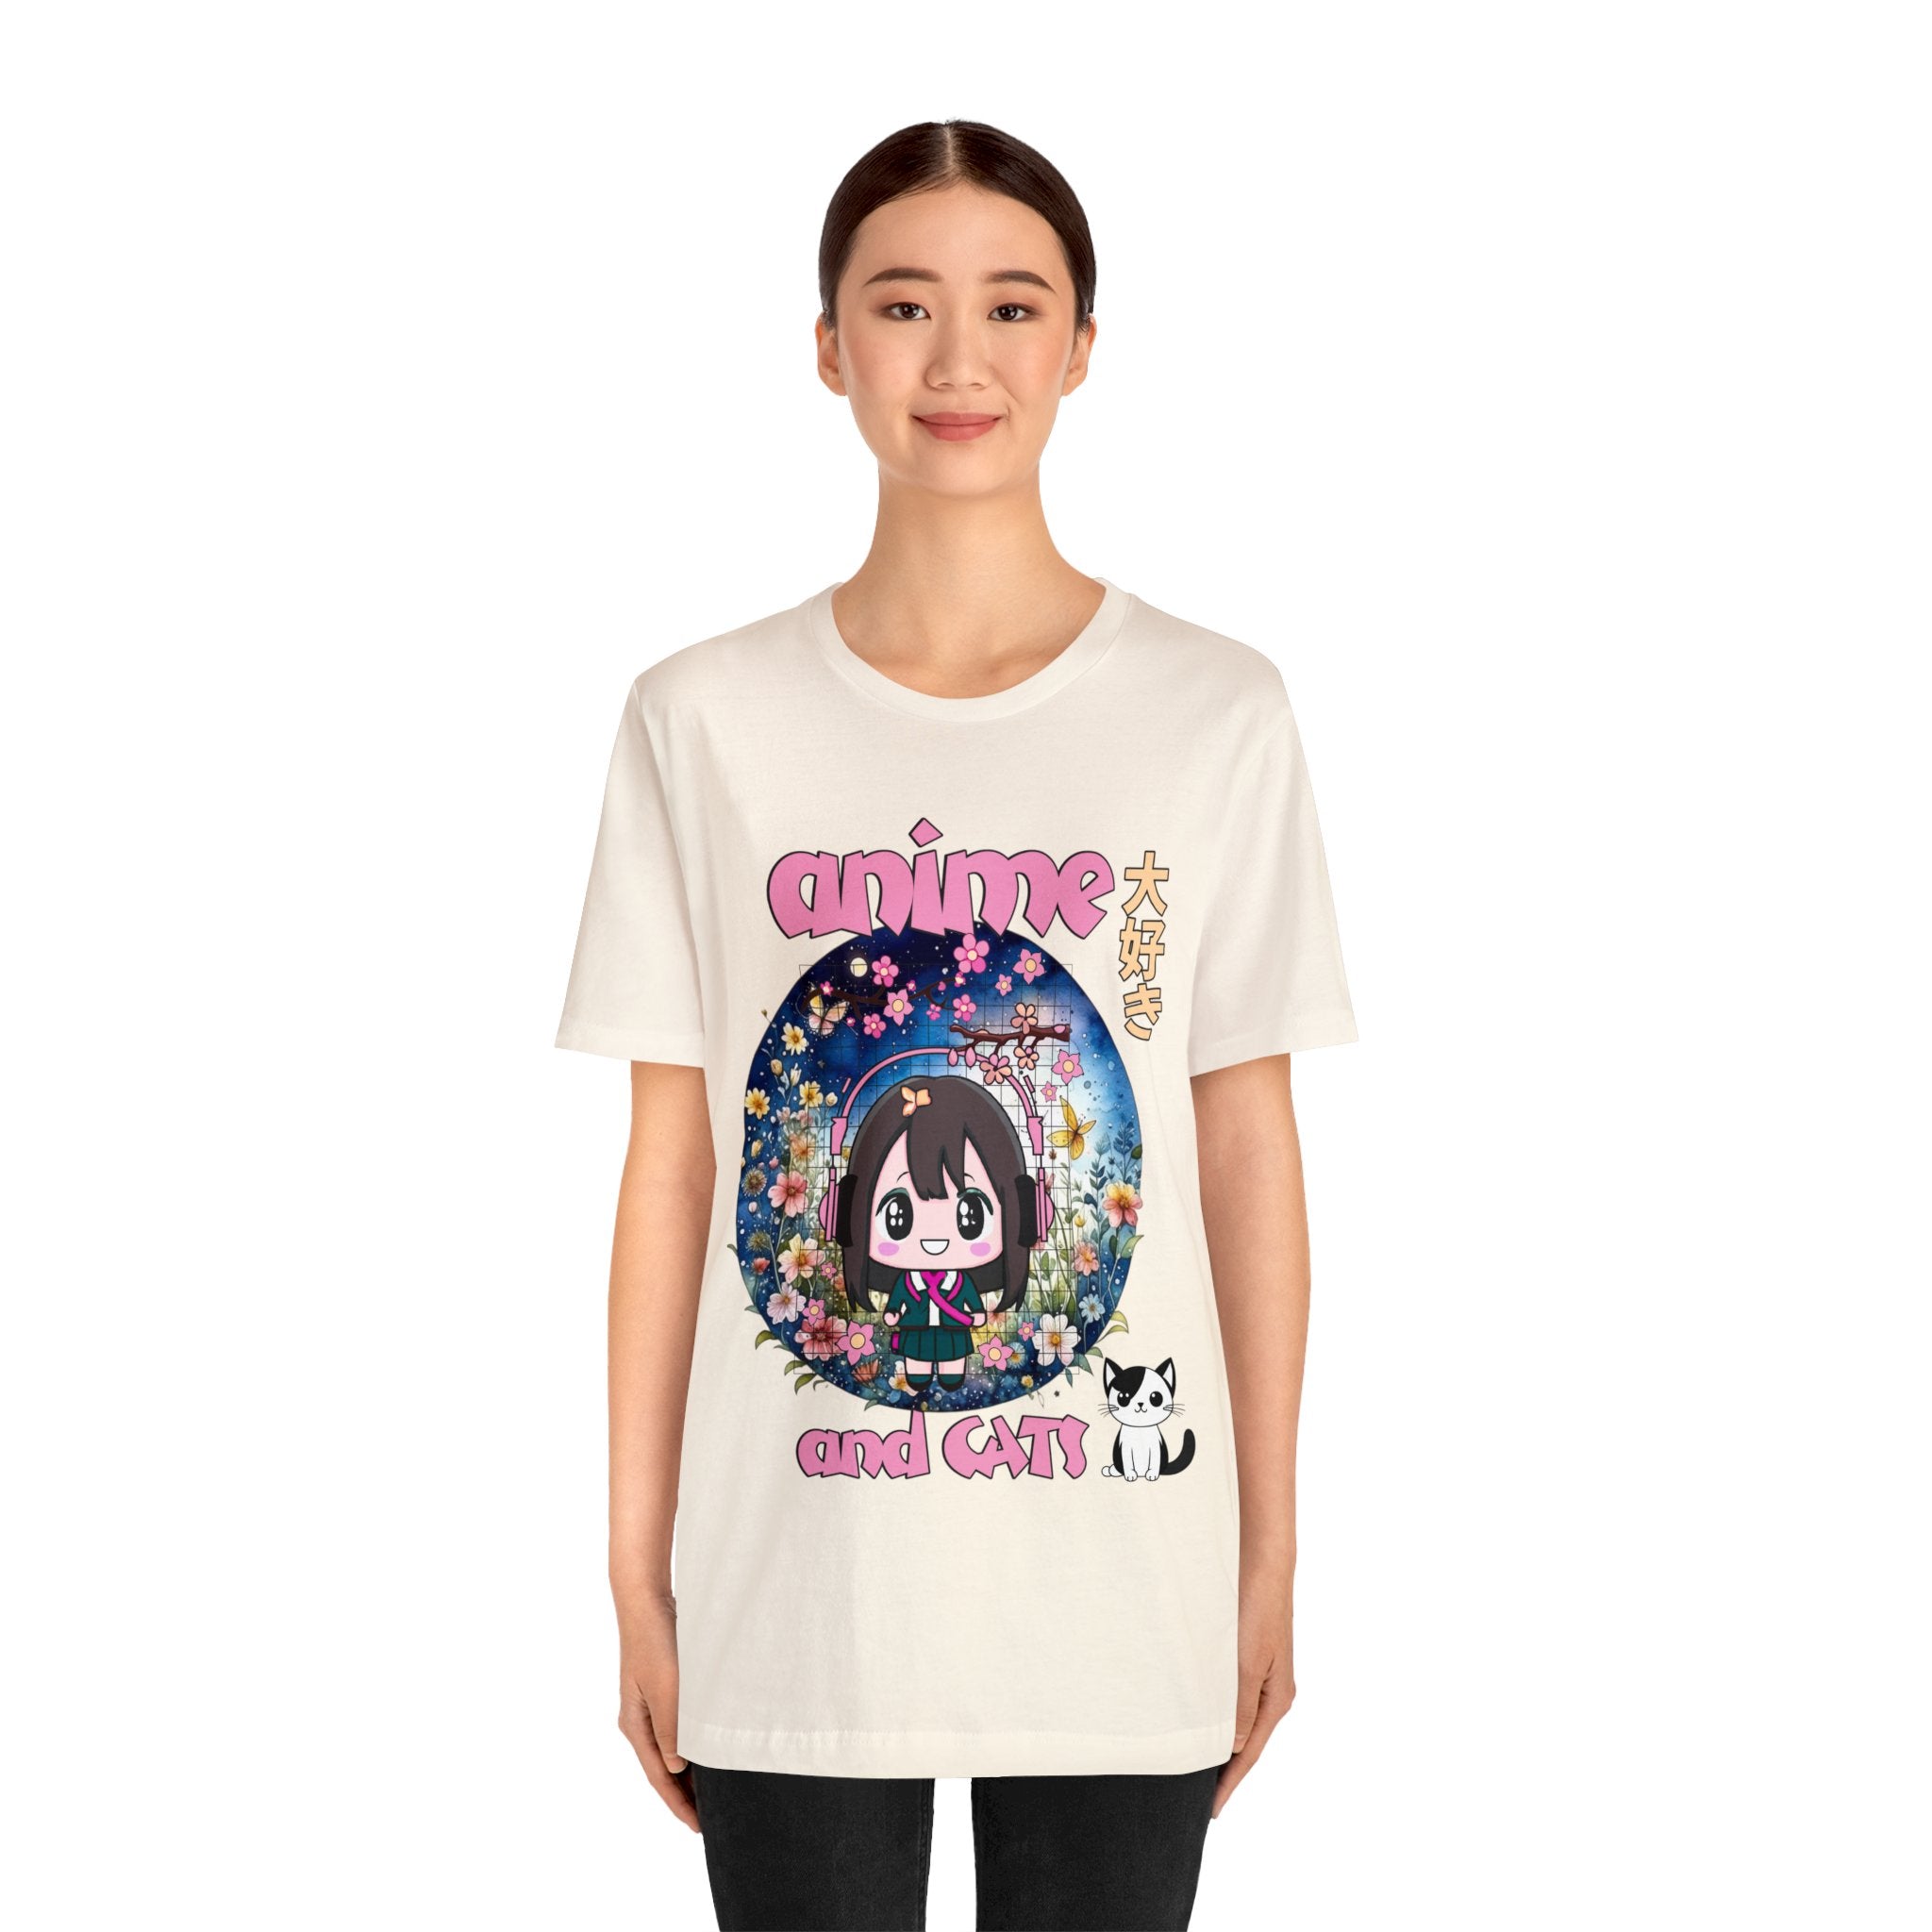 "Catime" - Anime And Cats Cool Unisex Jersey Short Sleeve Tee With Express Shipping available